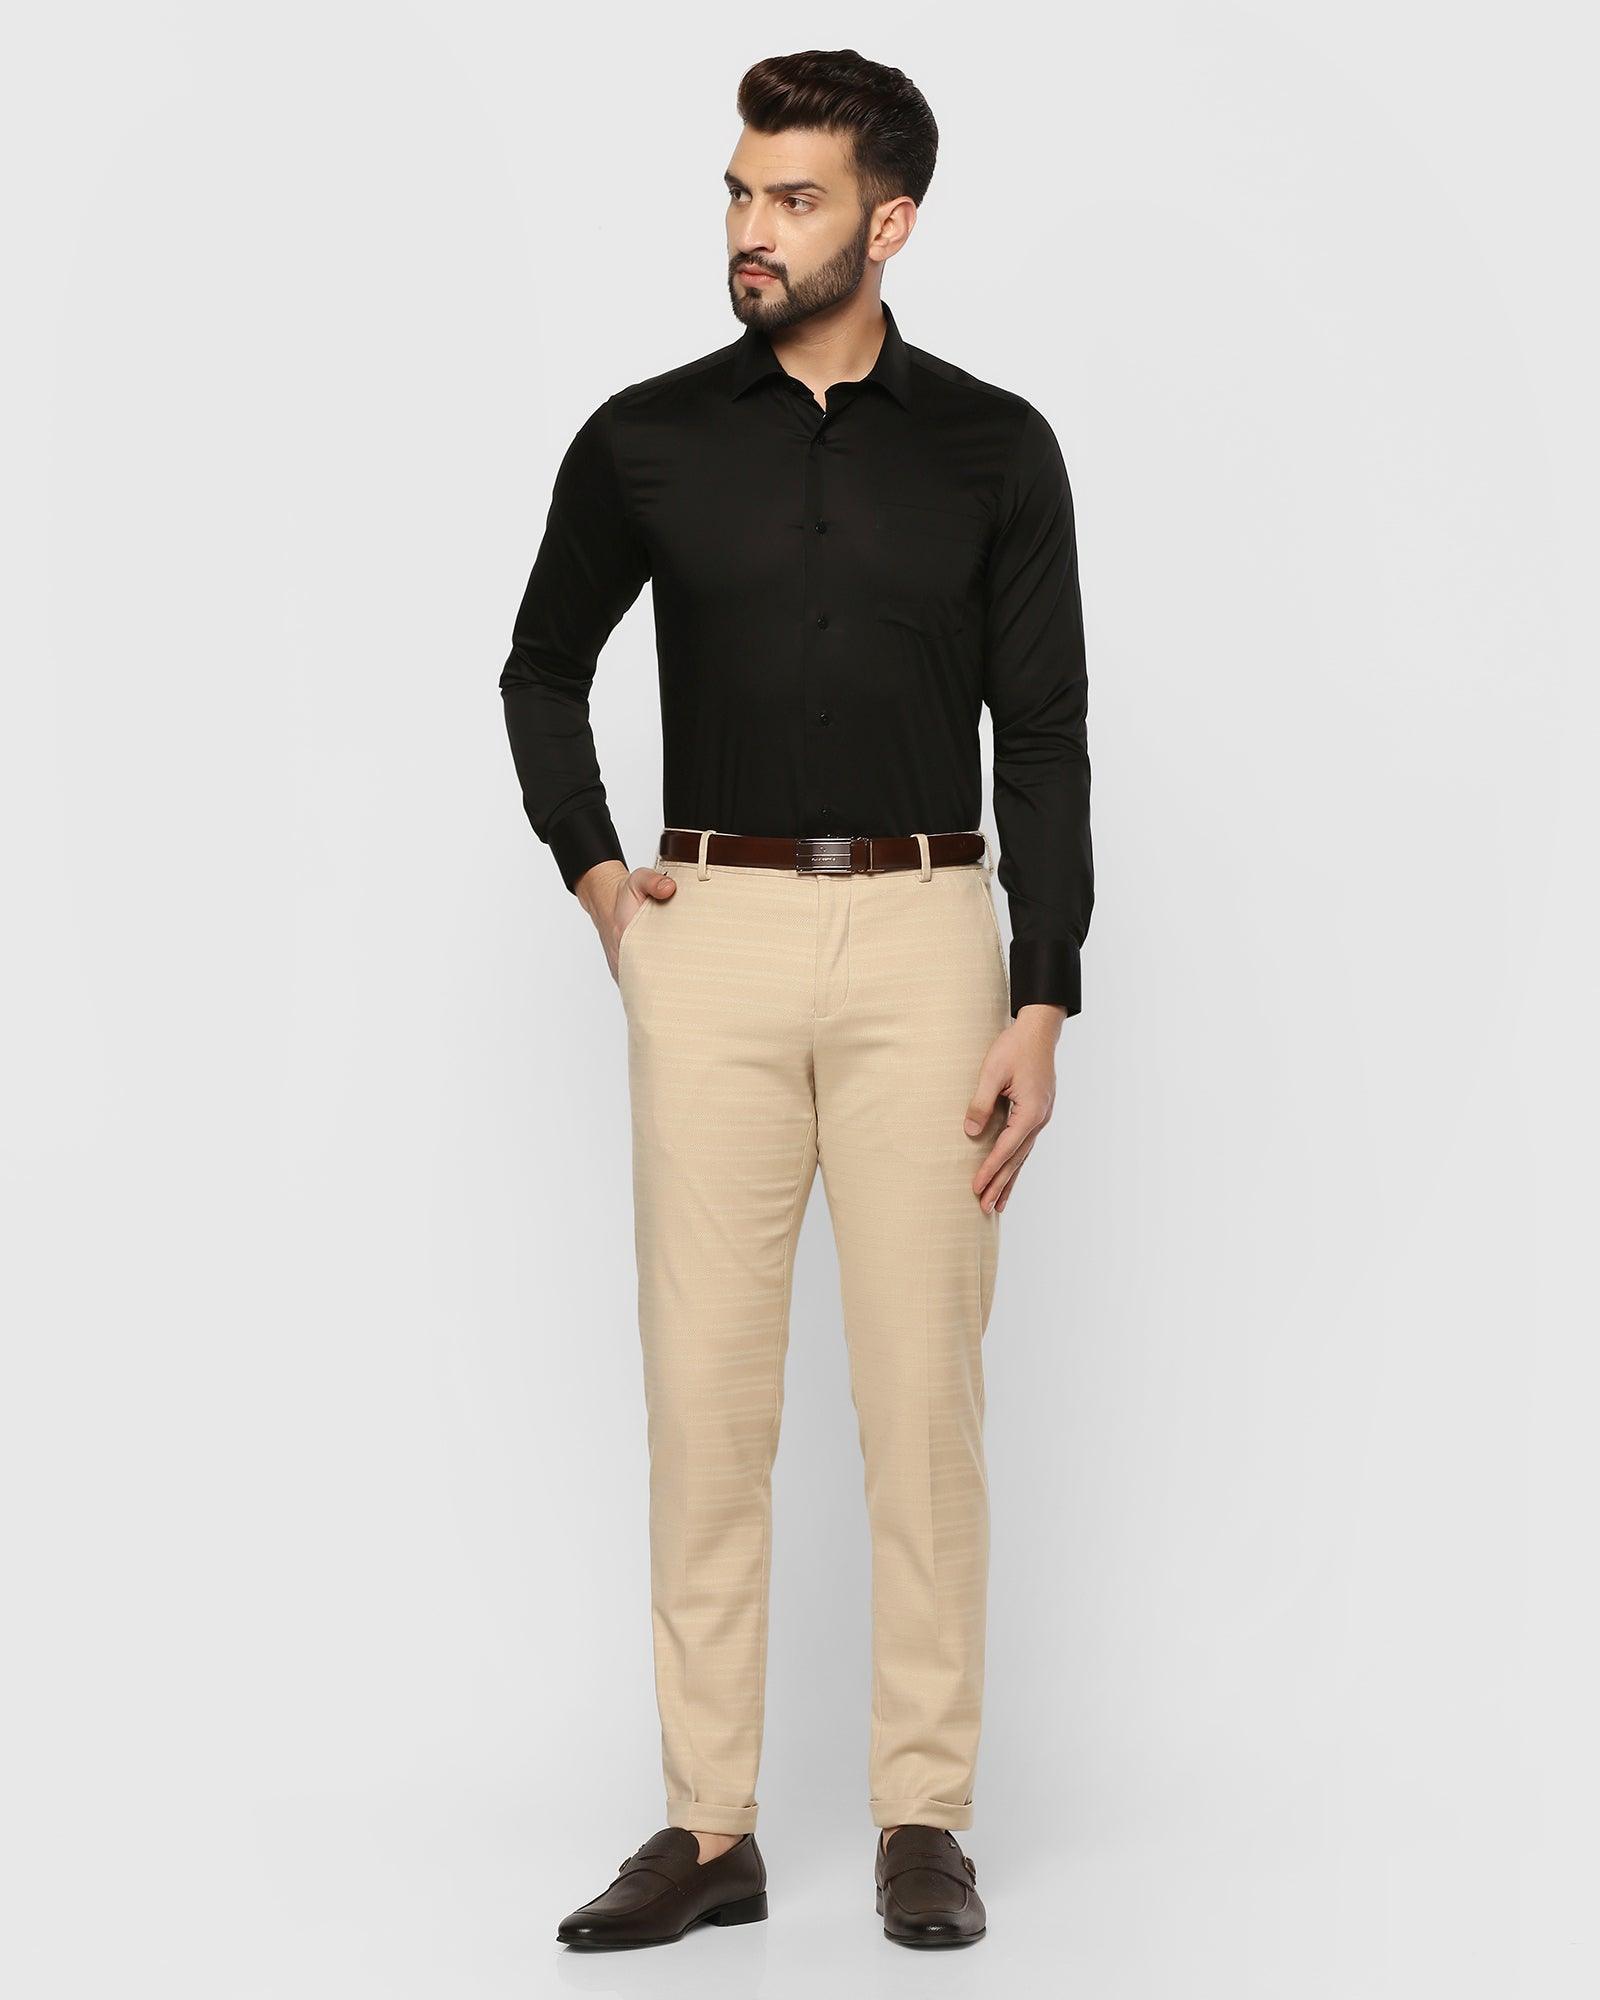 How To Wear Brown Pants With A Black Shirt  Ready Sleek